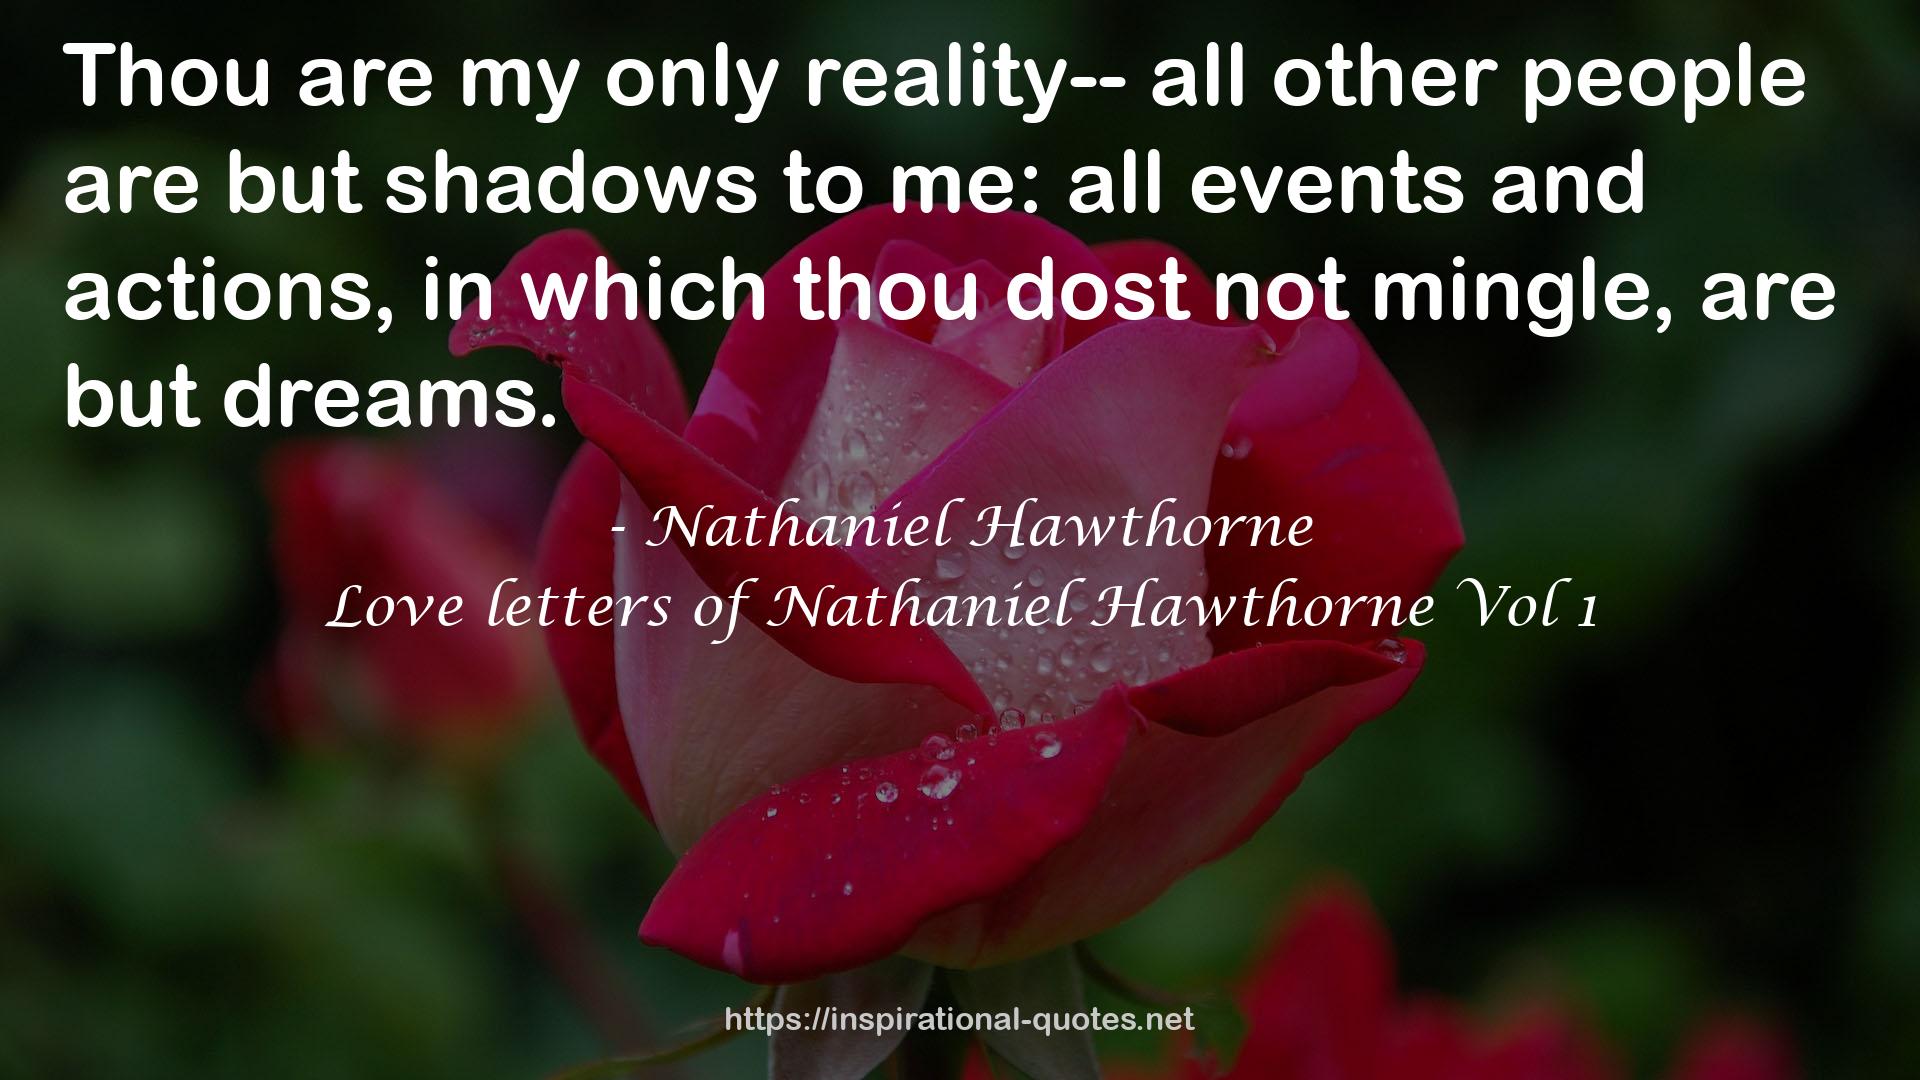 Love letters of Nathaniel Hawthorne Vol 1 QUOTES